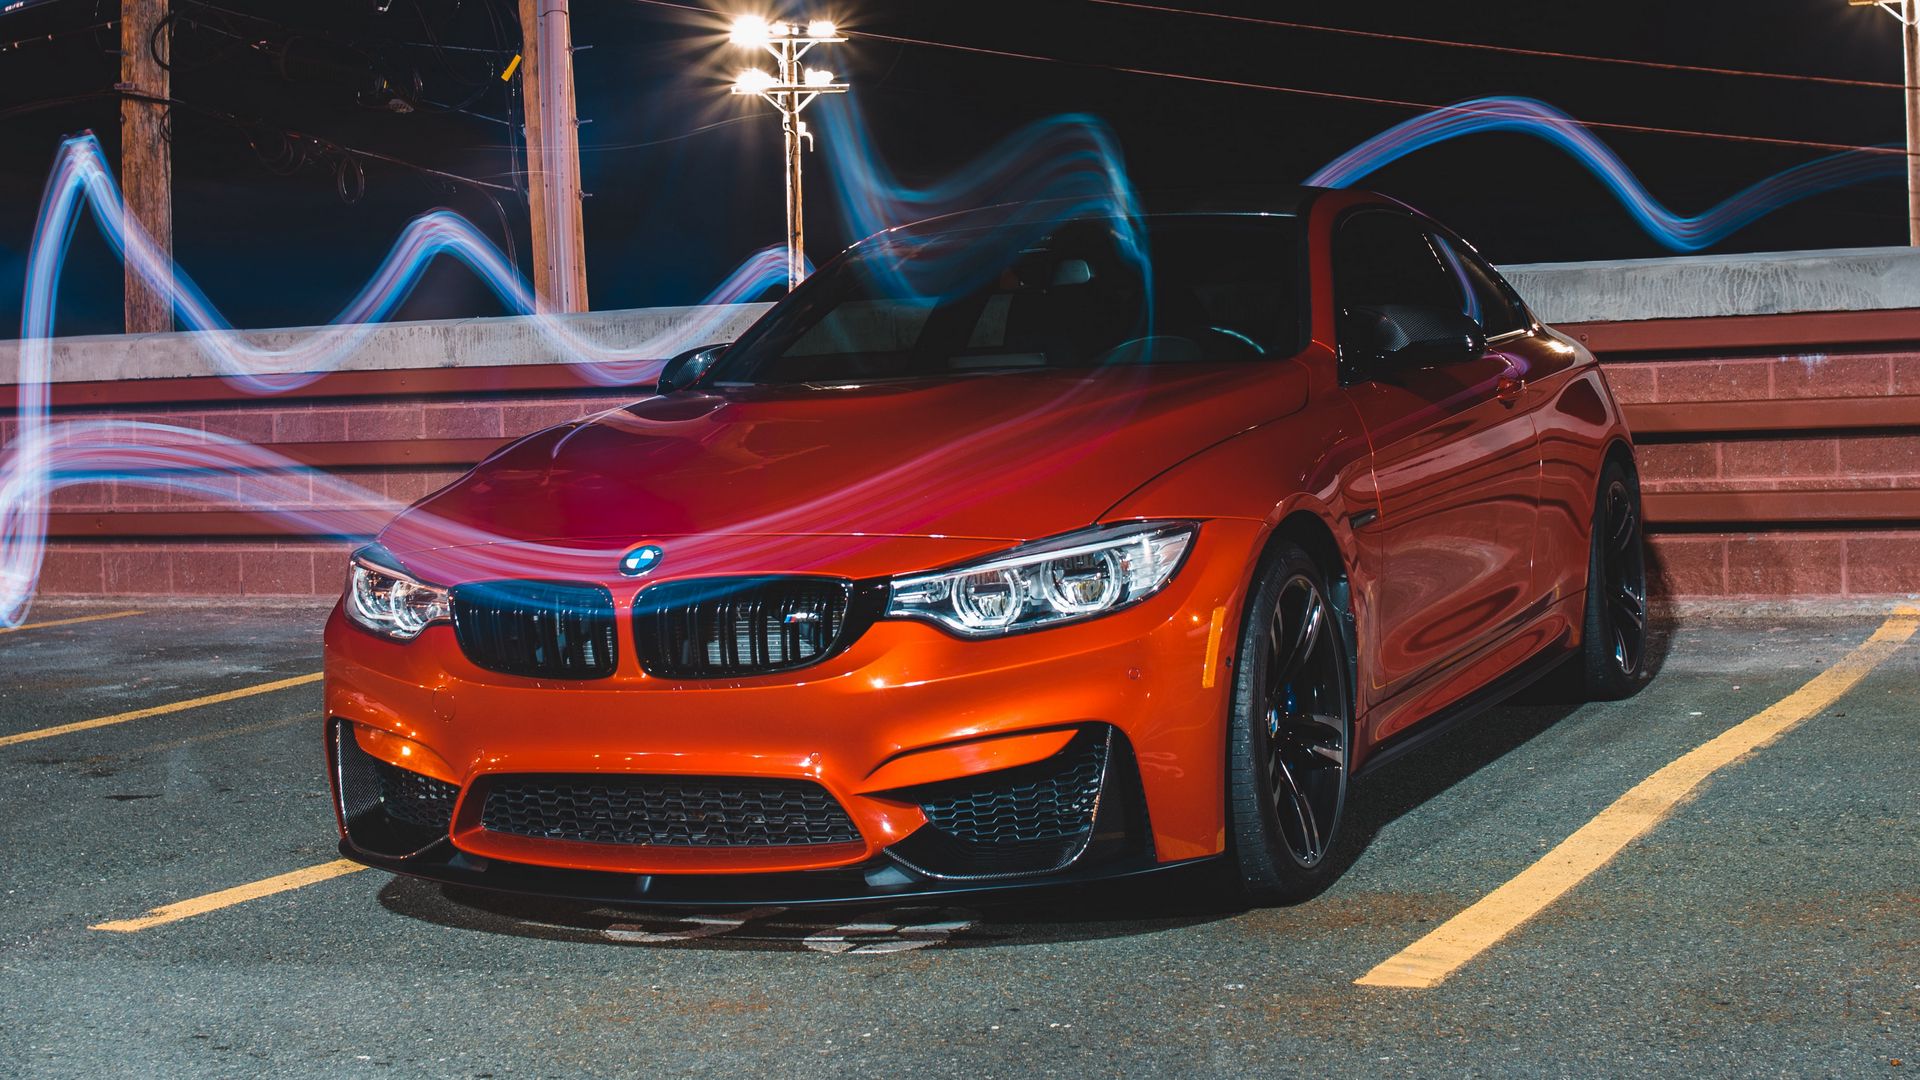 Download wallpaper 1920x1080 bmw m4, bmw, car, sports car, front view, red  full hd, hdtv, fhd, 1080p hd background